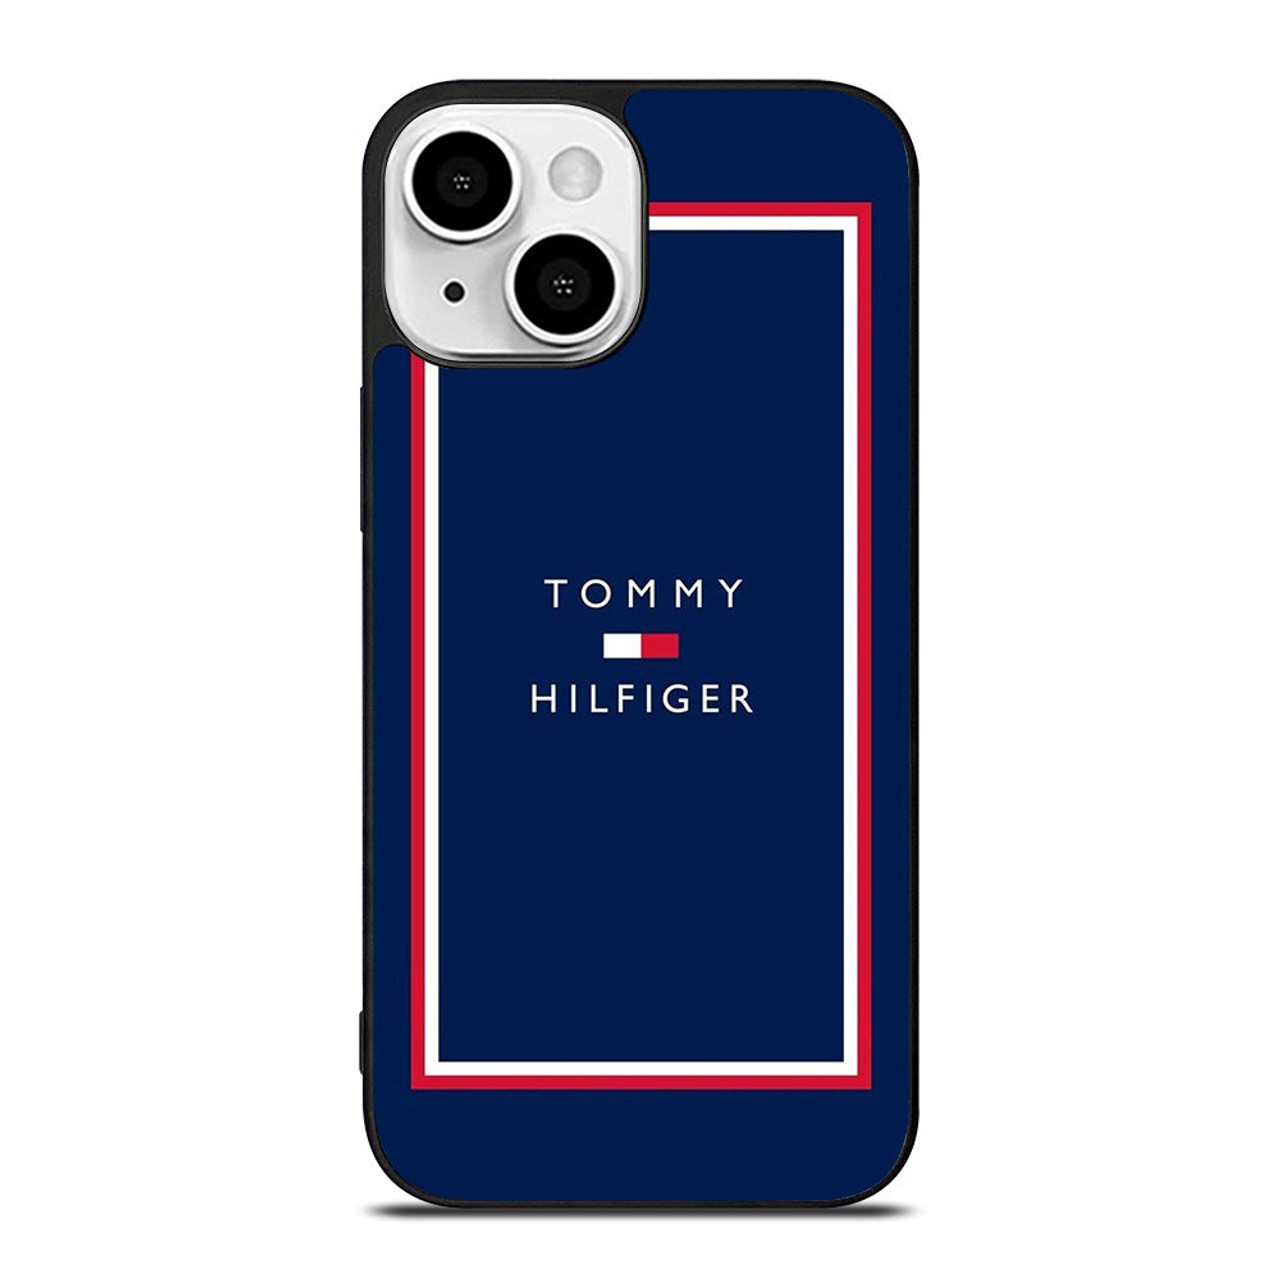 TOMMY HILFIGER 13 Mini Case Cover